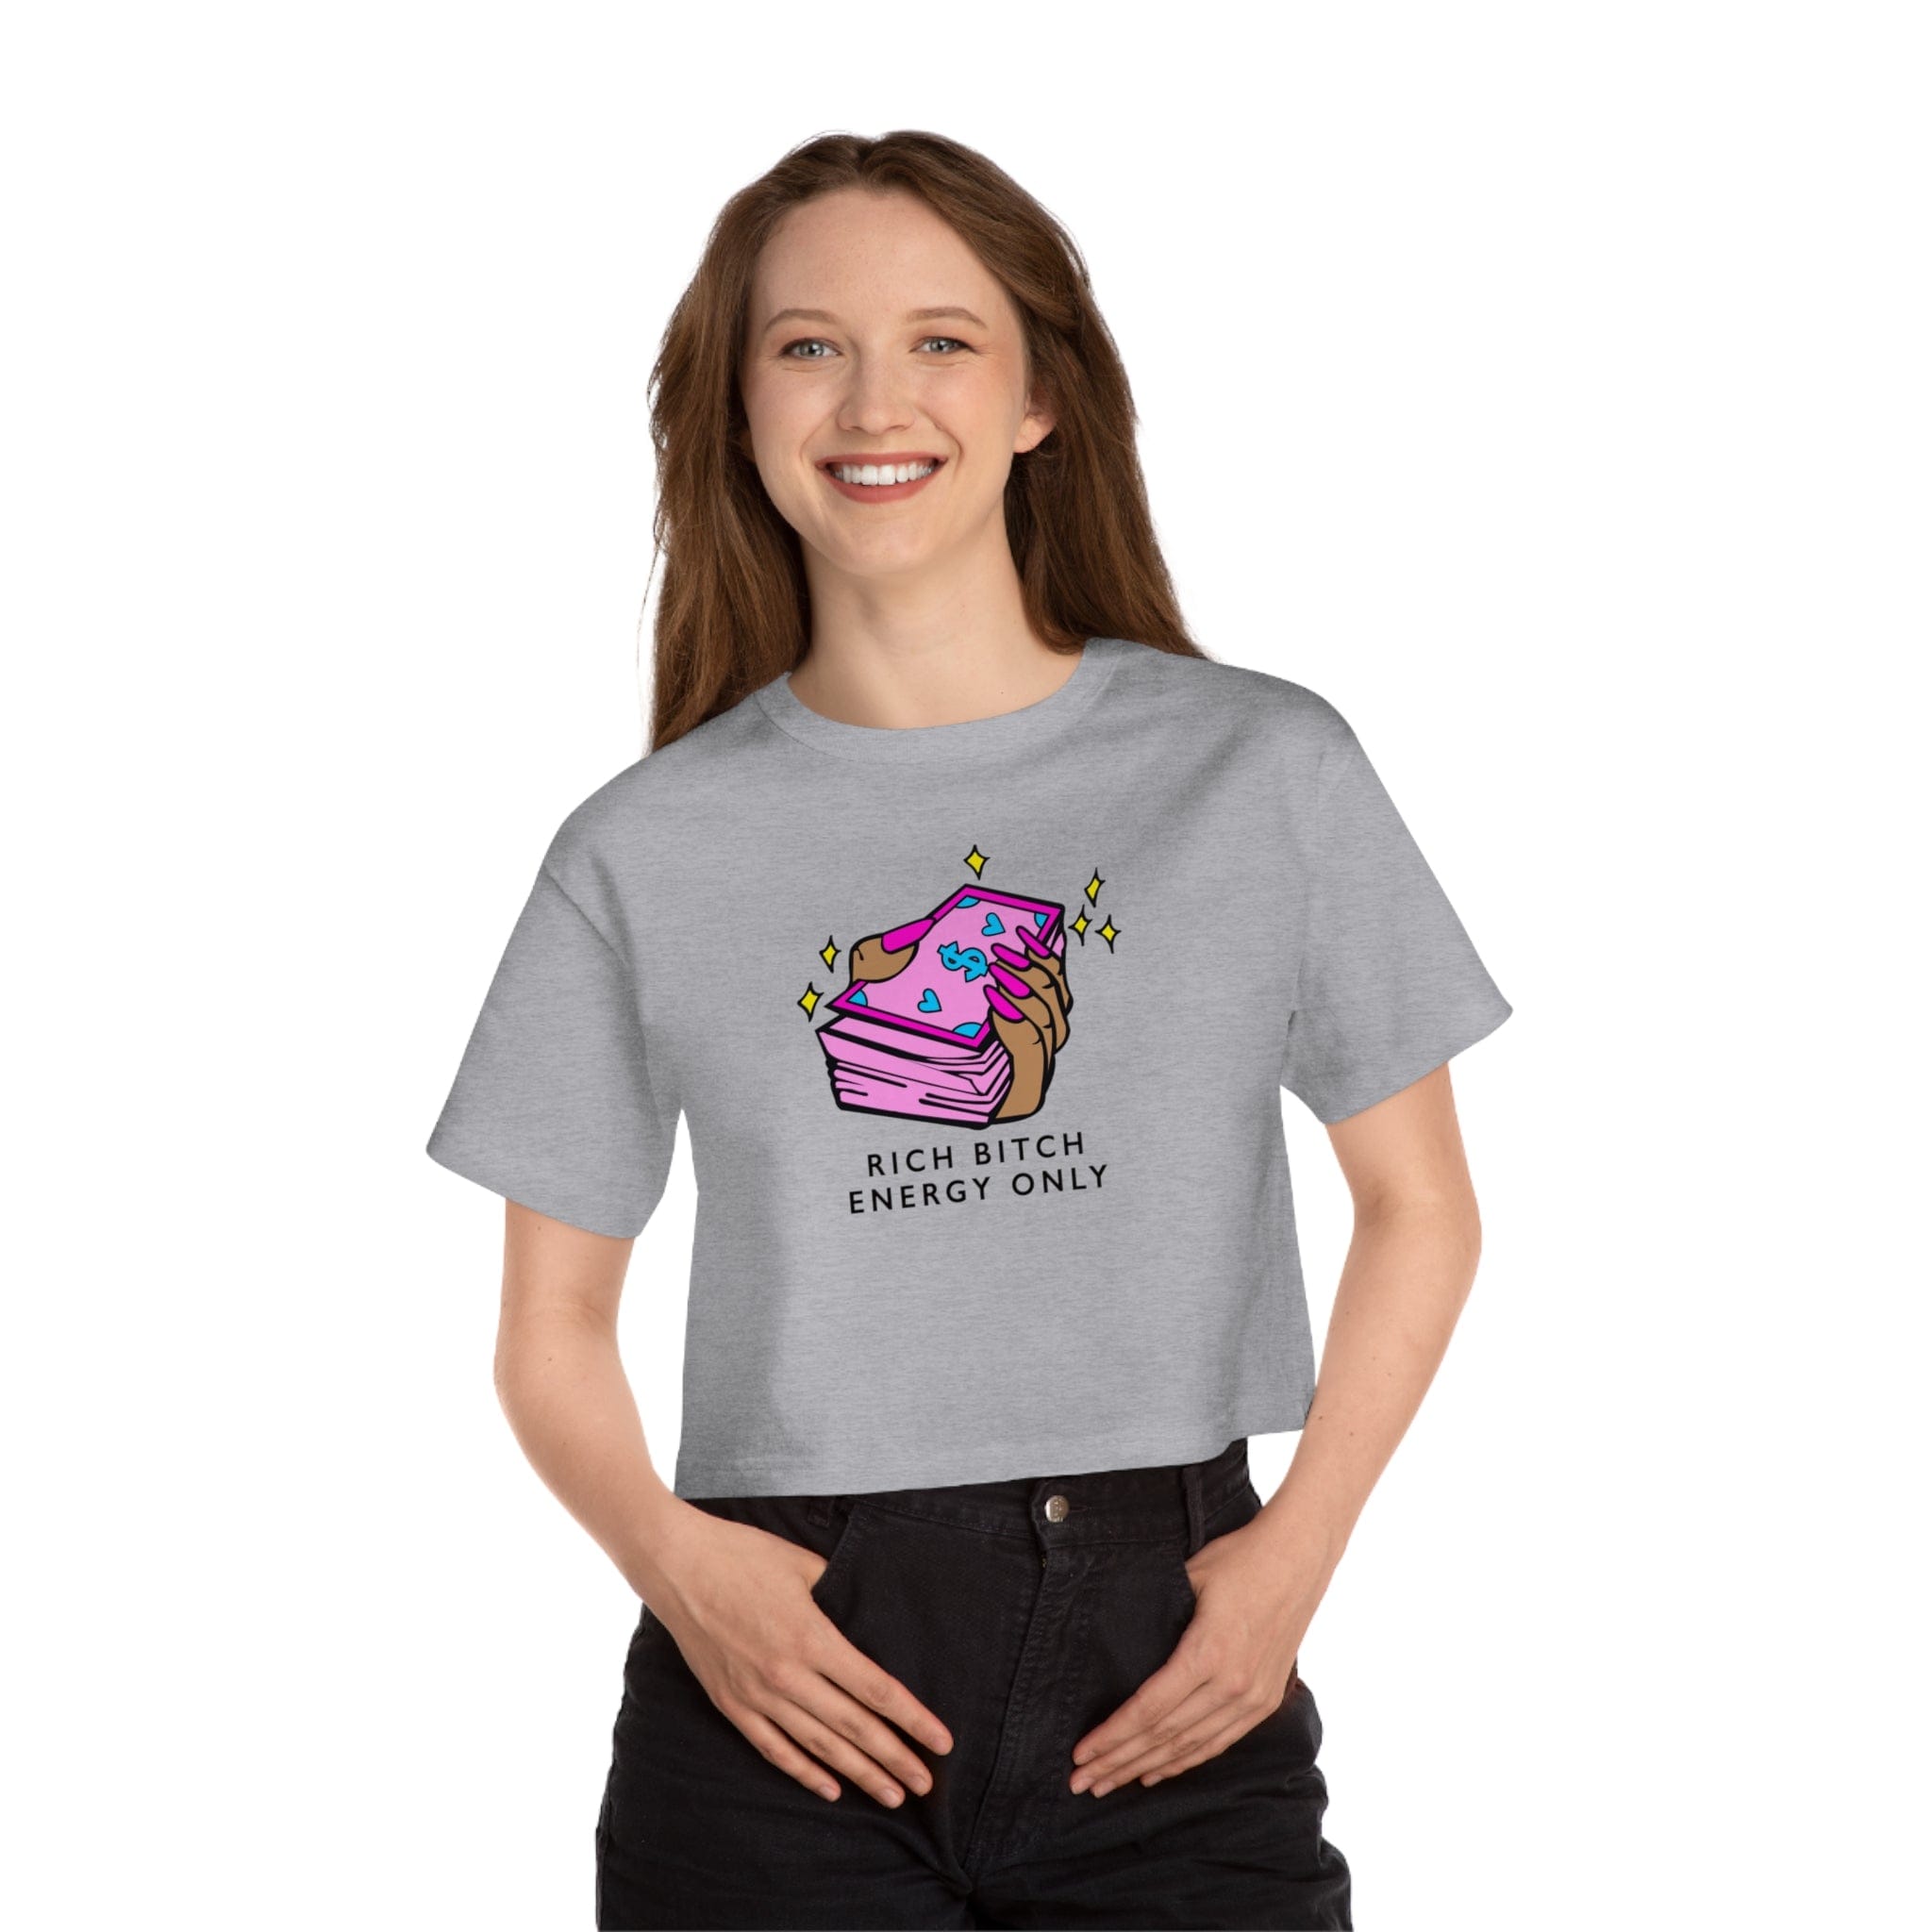 'RICH BITCH ENERGY ONLY" CROPPED T-SHIRT